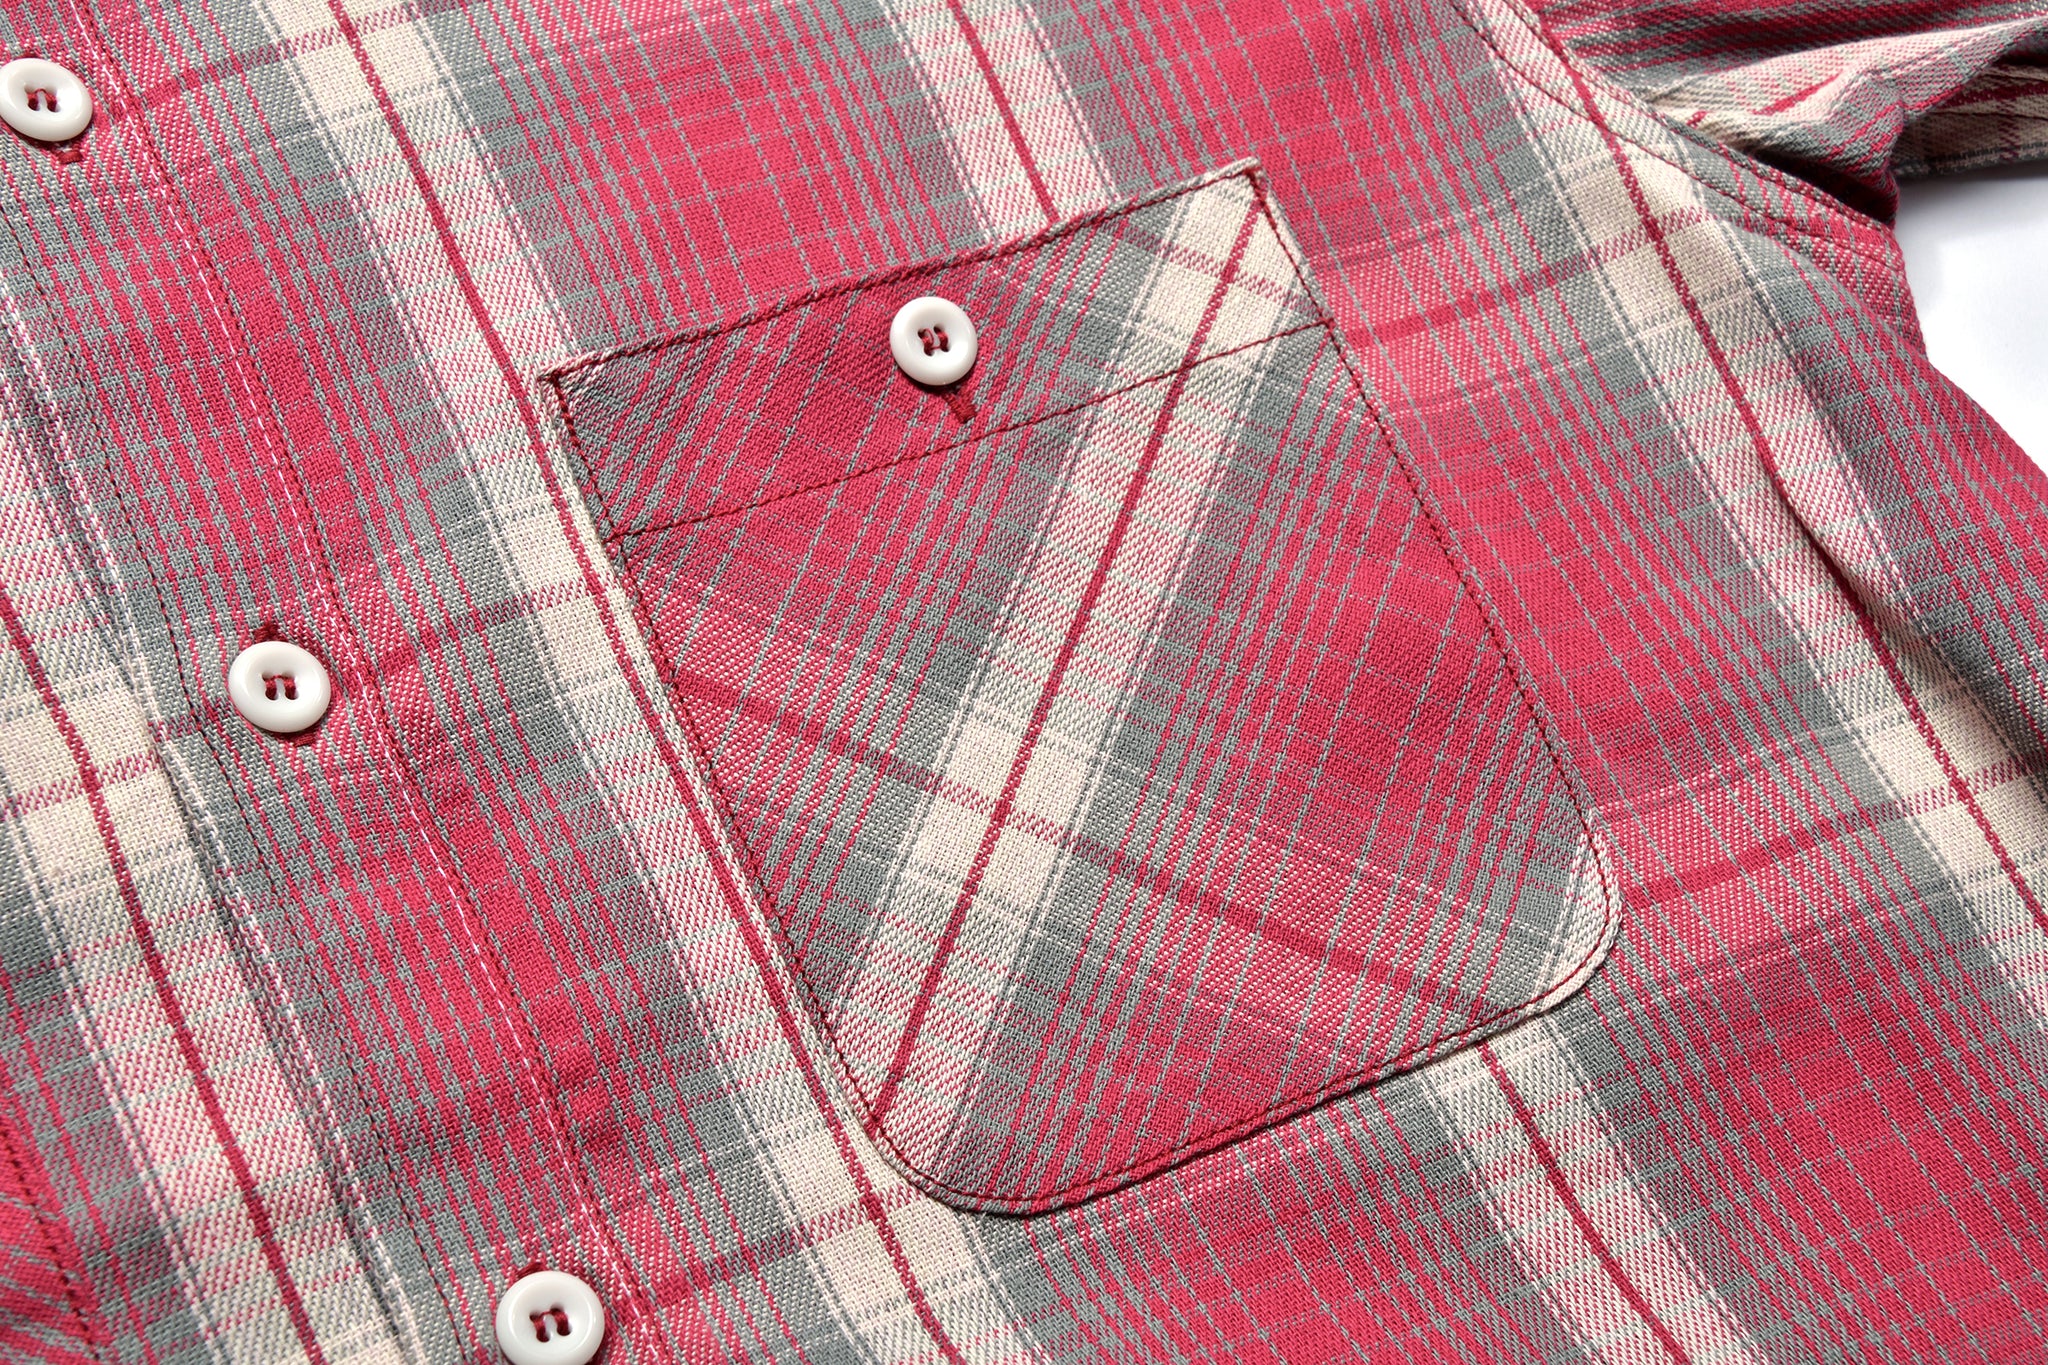 8HU OMBRE CHECK SUMMER FLANNEL SHIRT – The Real McCoy's